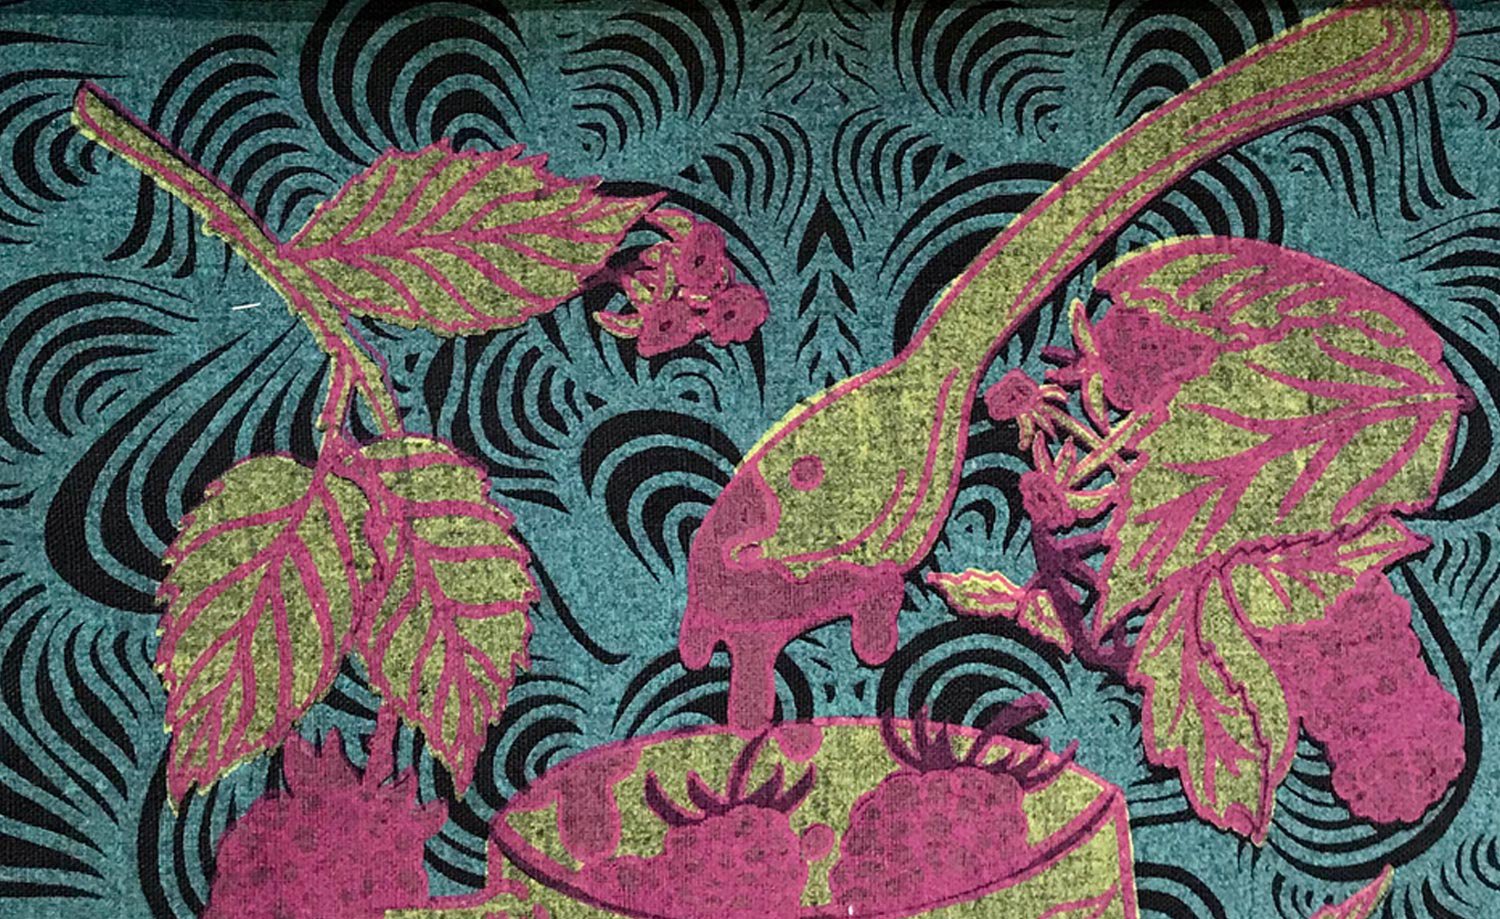 Detail of print on fabric showing spoon in a jar with pattern behind by Lizeth Gallegos